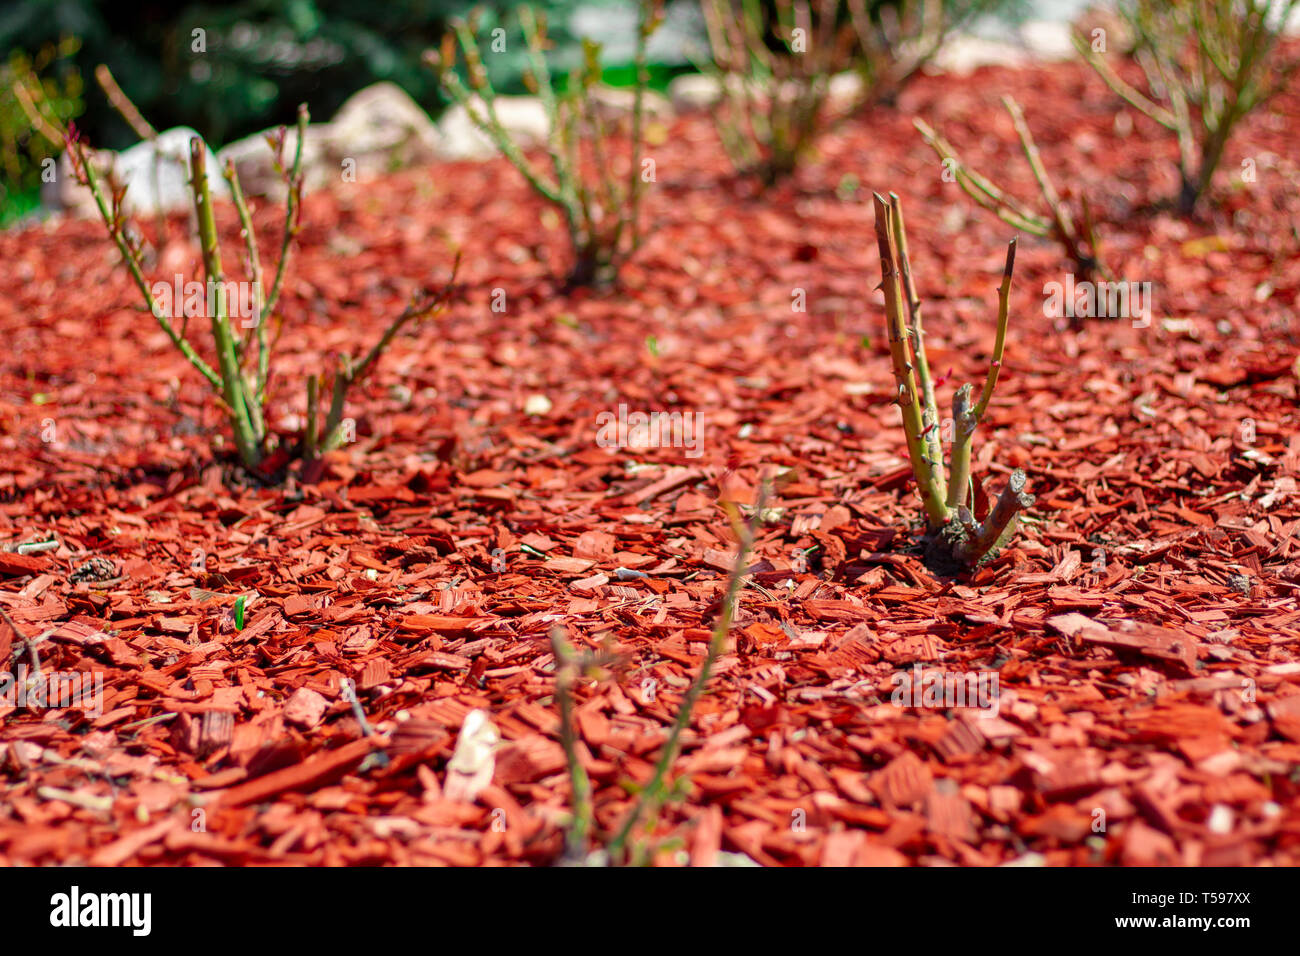 Red pine mulch on a flowerbed with rose bushes. Posh Landscape Design flower beds roses. Beautiful mulching pink flower beds red pine shavings. Mulche Stock Photo